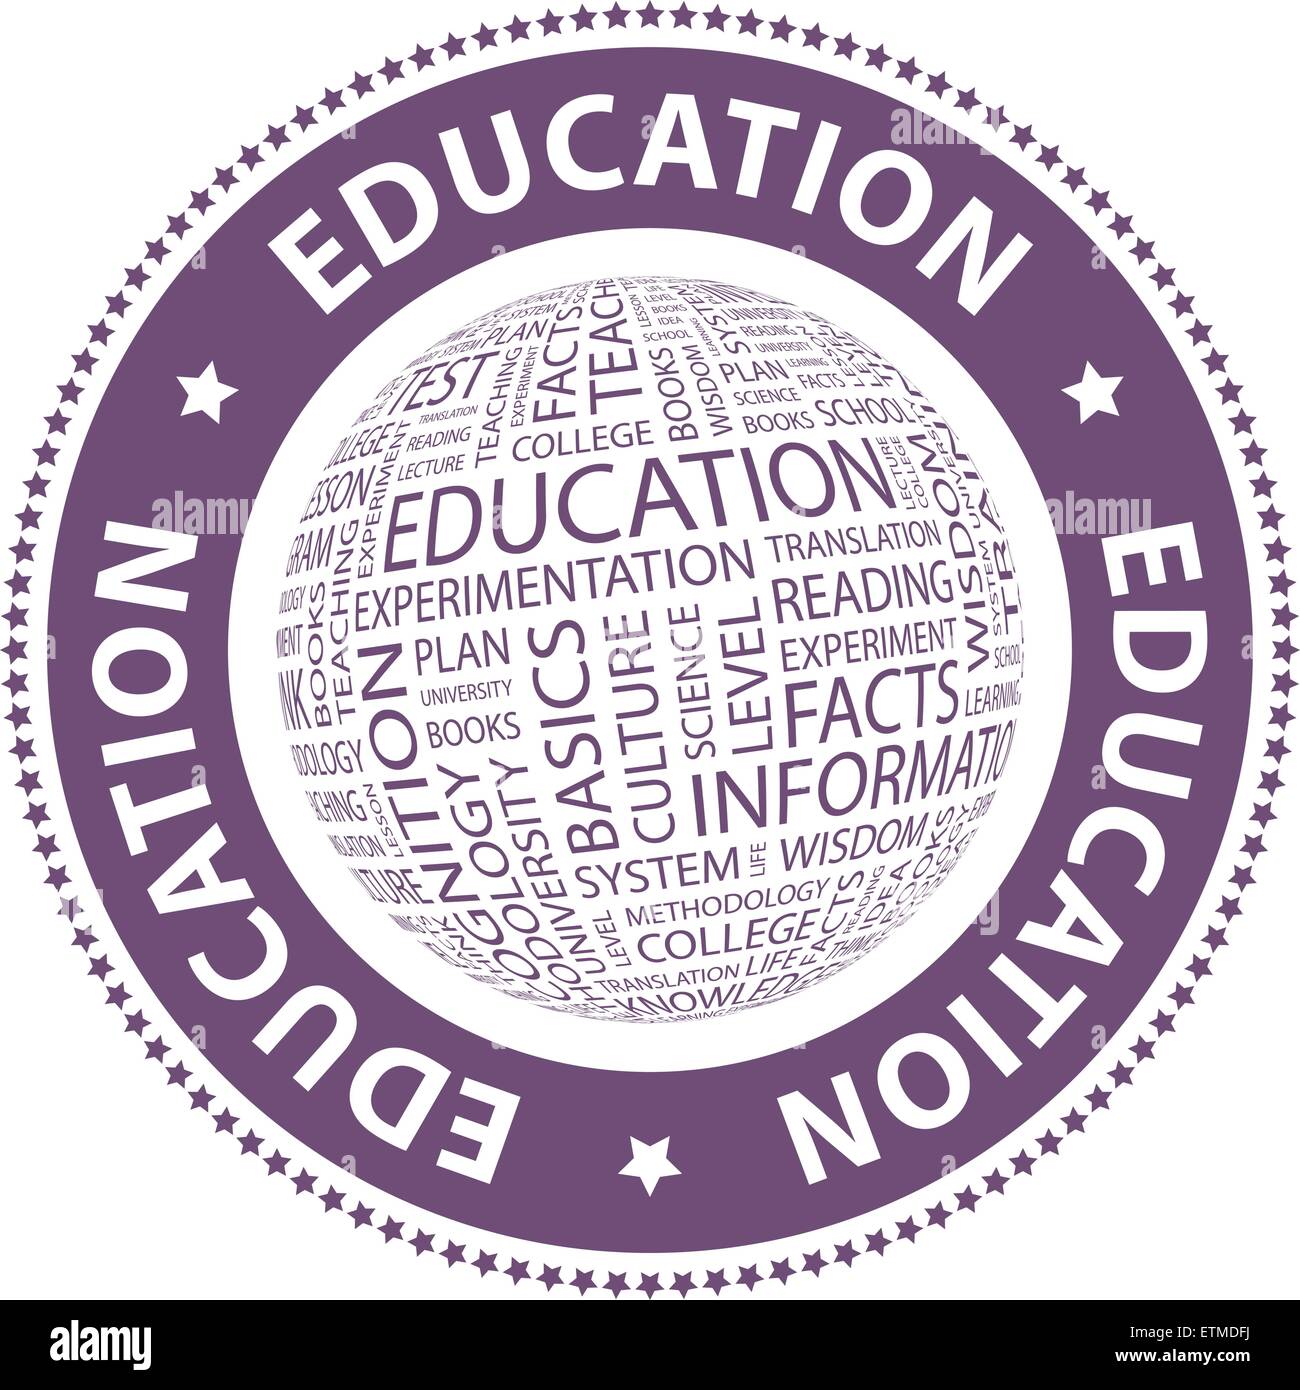 EDUCATION. Word cloud illustration. Tag cloud concept collage. Stock Vector